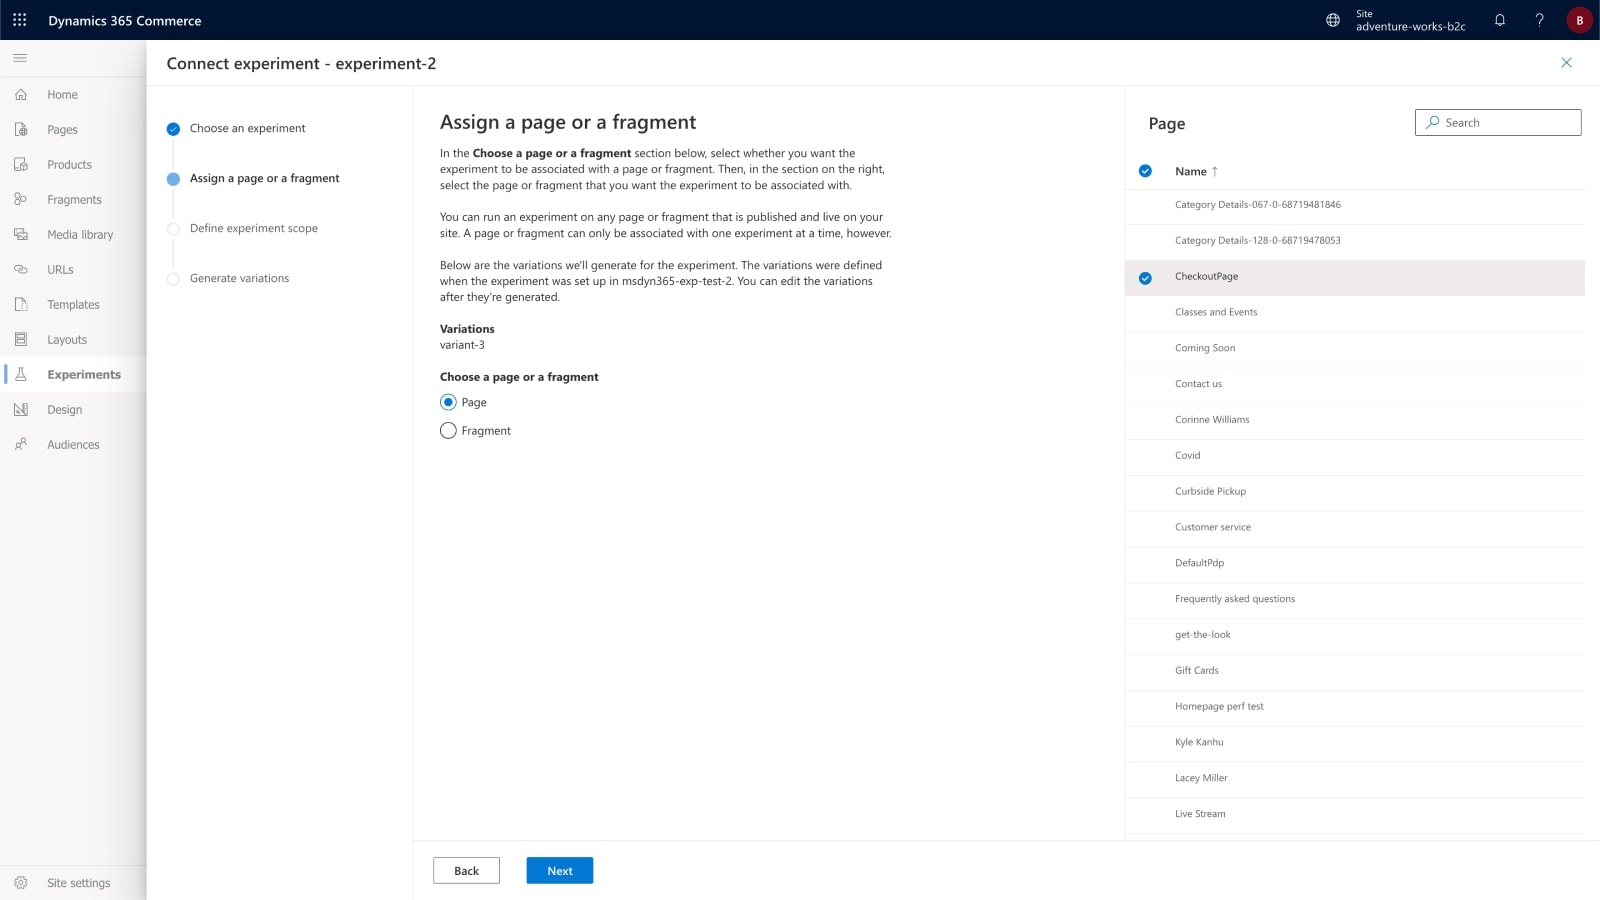 Quickly test and evolve your digital channels Dynamics 365 Commerce